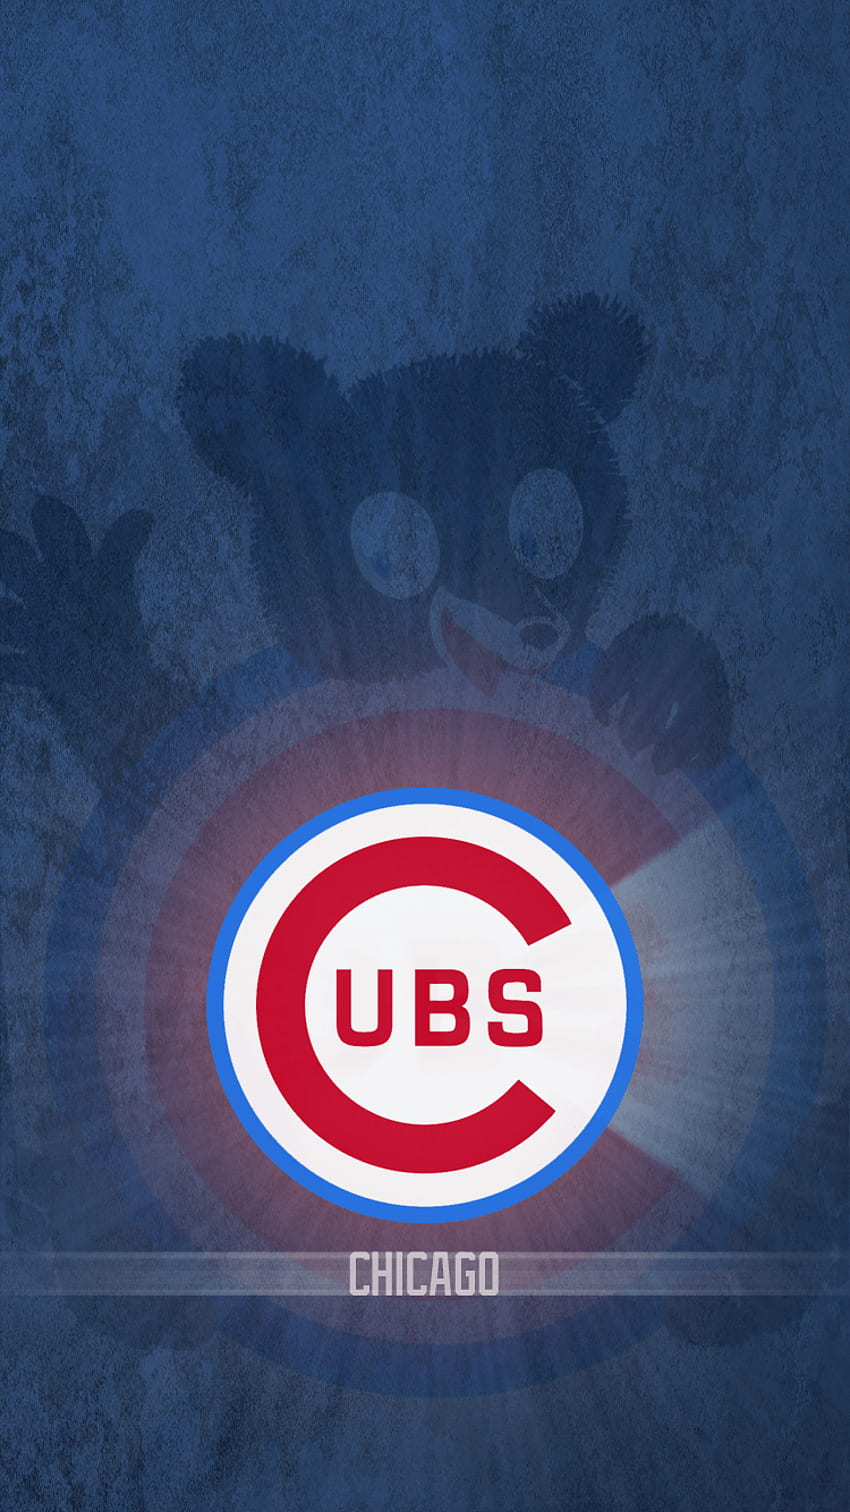 Chicago Cubs 1080P 2K 4K 5K HD wallpapers free download  Wallpaper Flare